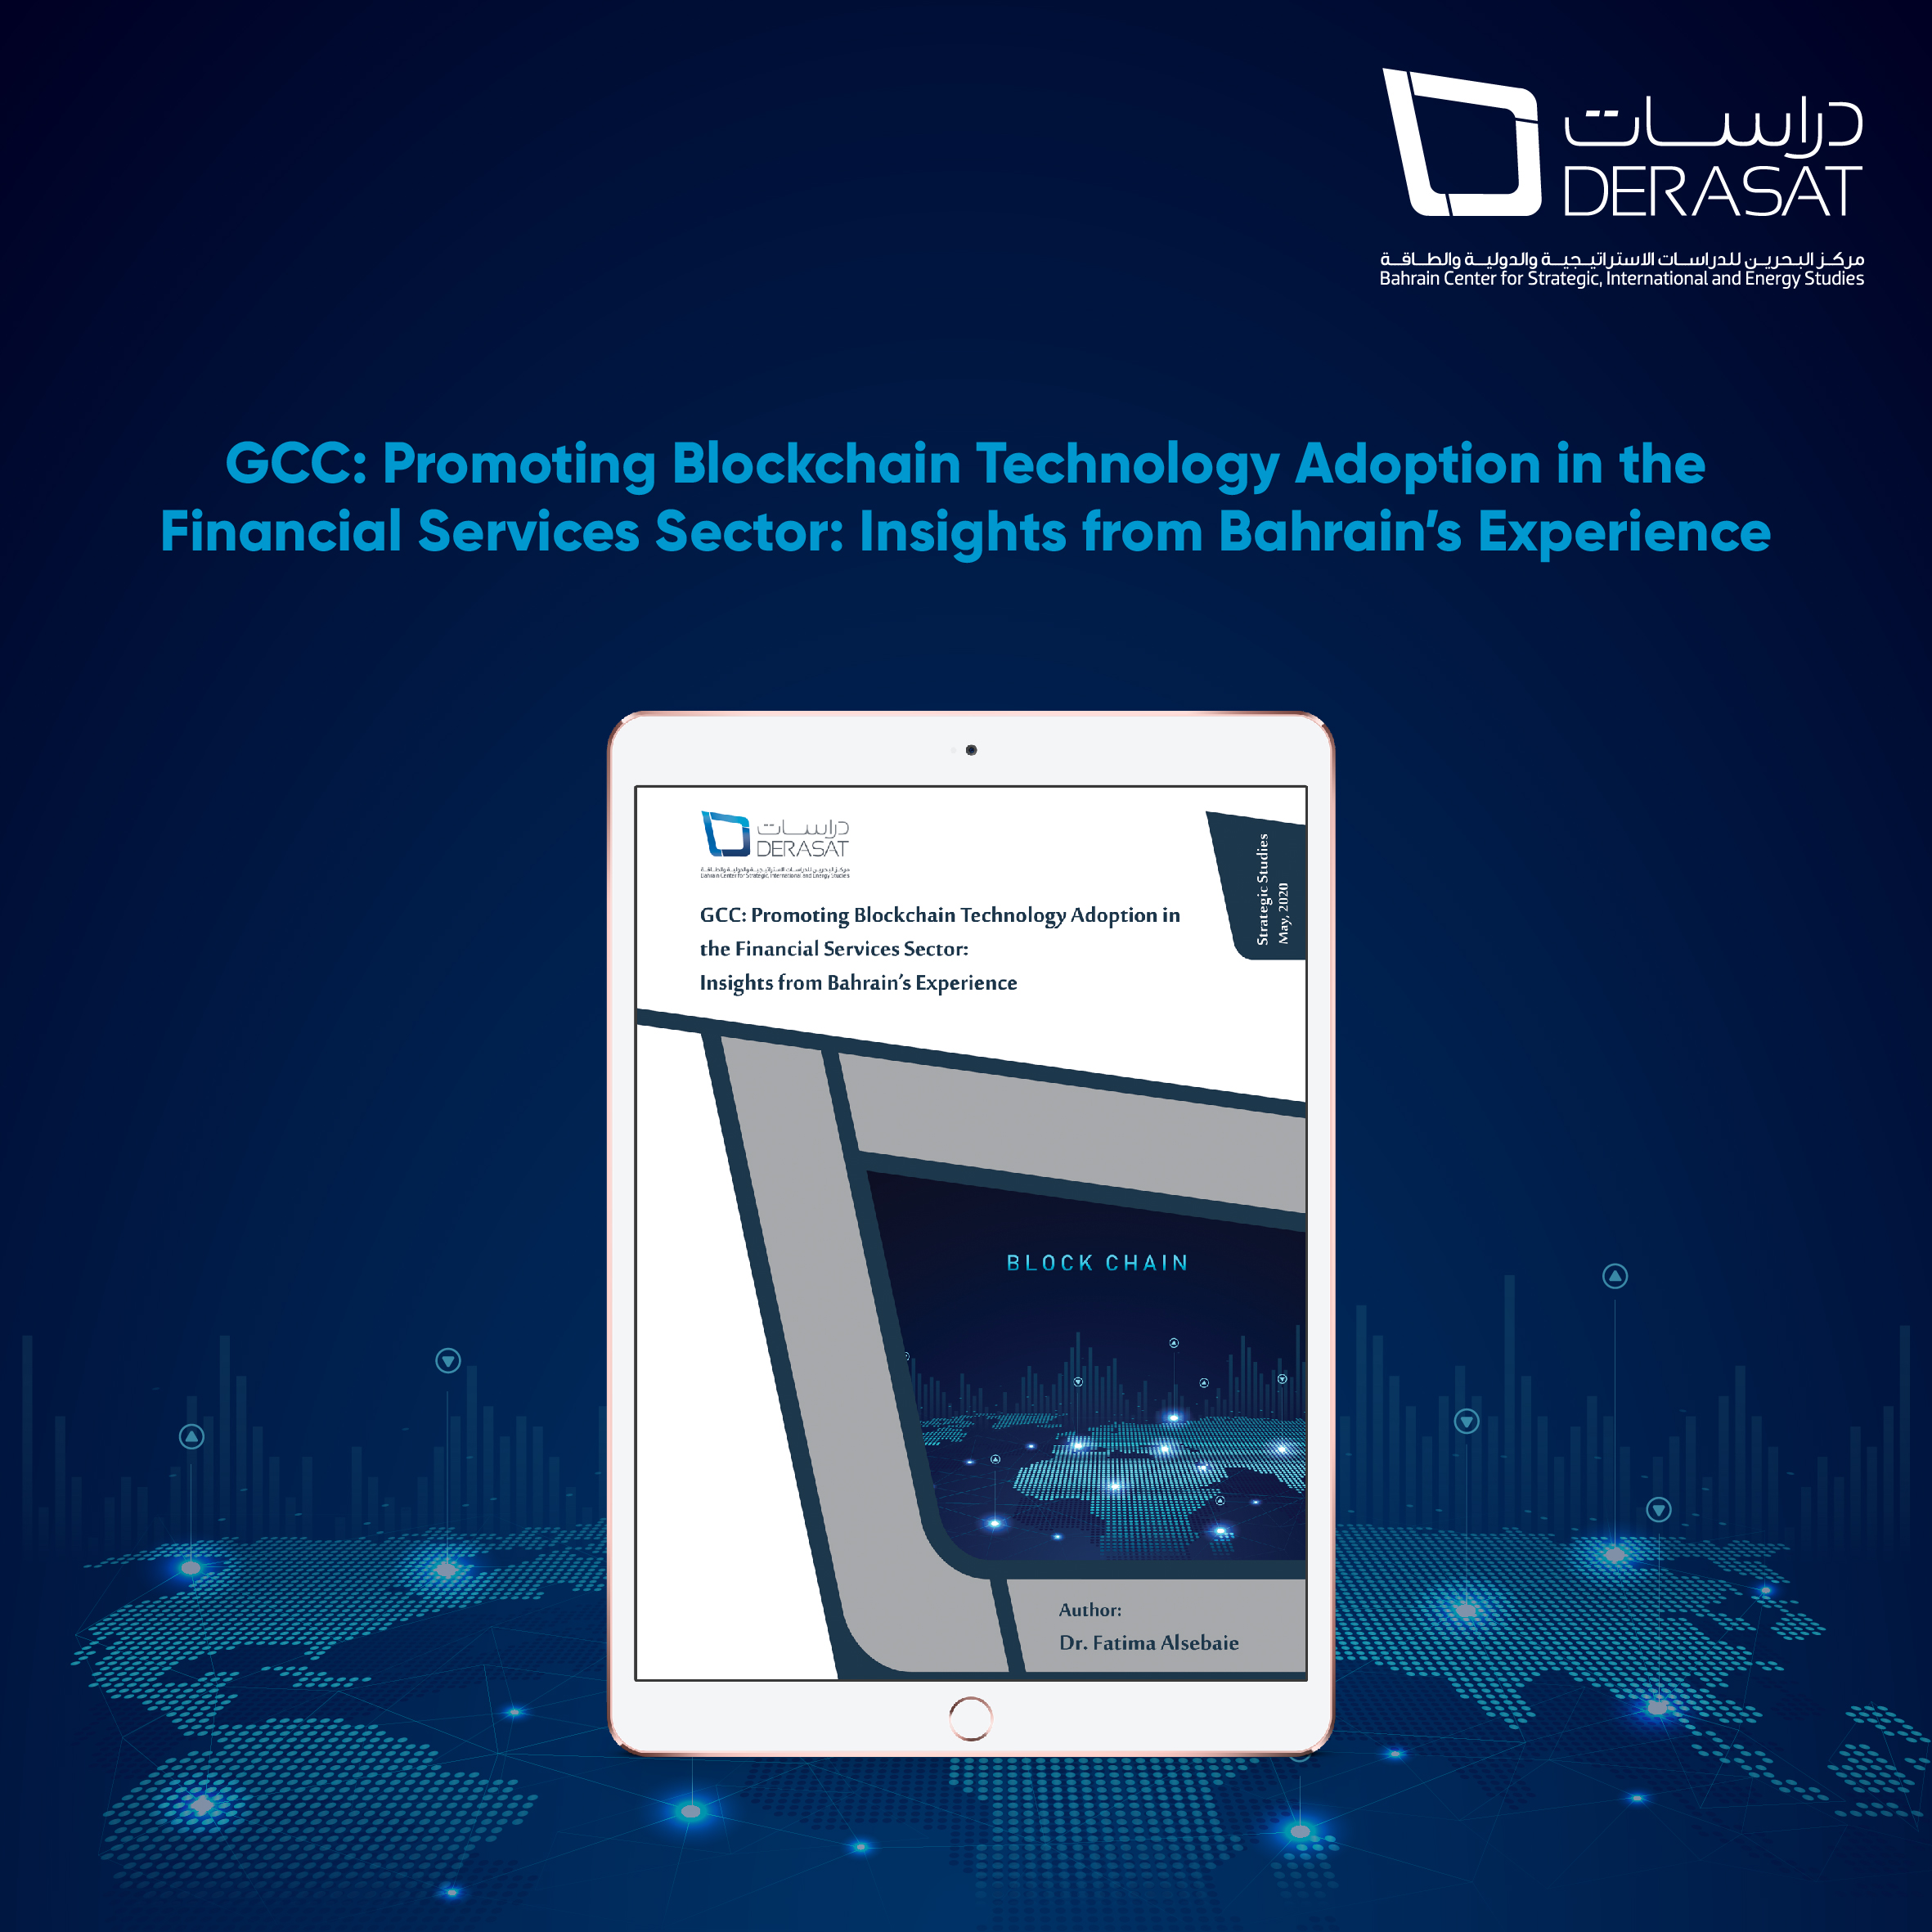 GCC: Promoting Blockchain Technology Adoption in the Financial Services Sector: Insights from Bahrain’s Experience